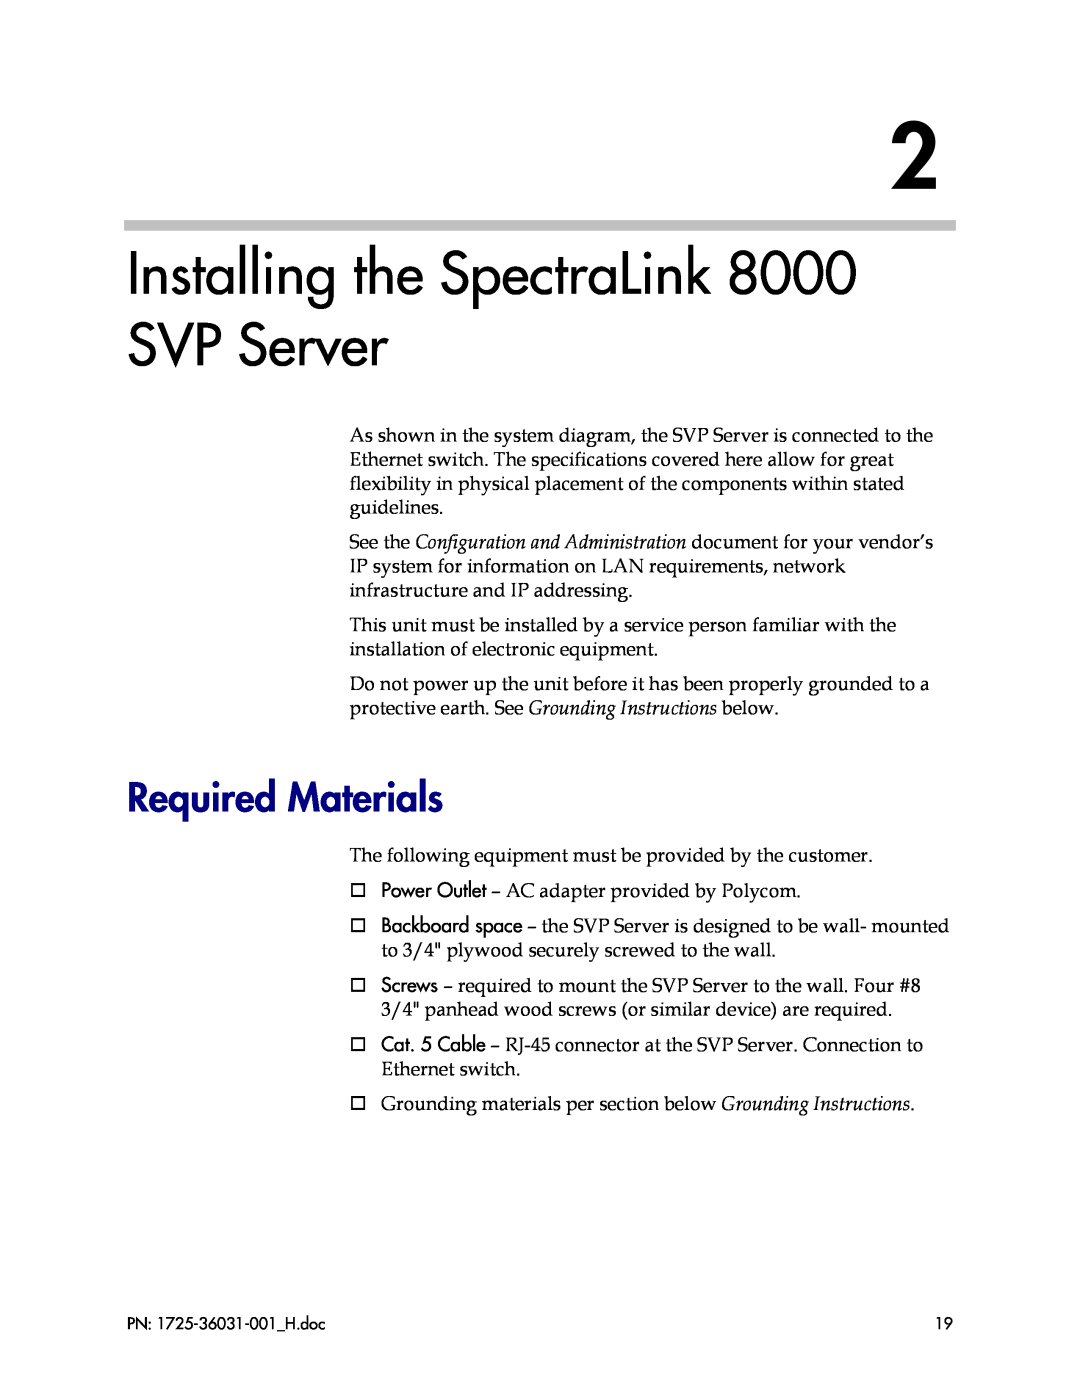 Polycom 1725-36031-001, VP010 manual Installing the SpectraLink 8000 SVP Server, Required Materials 